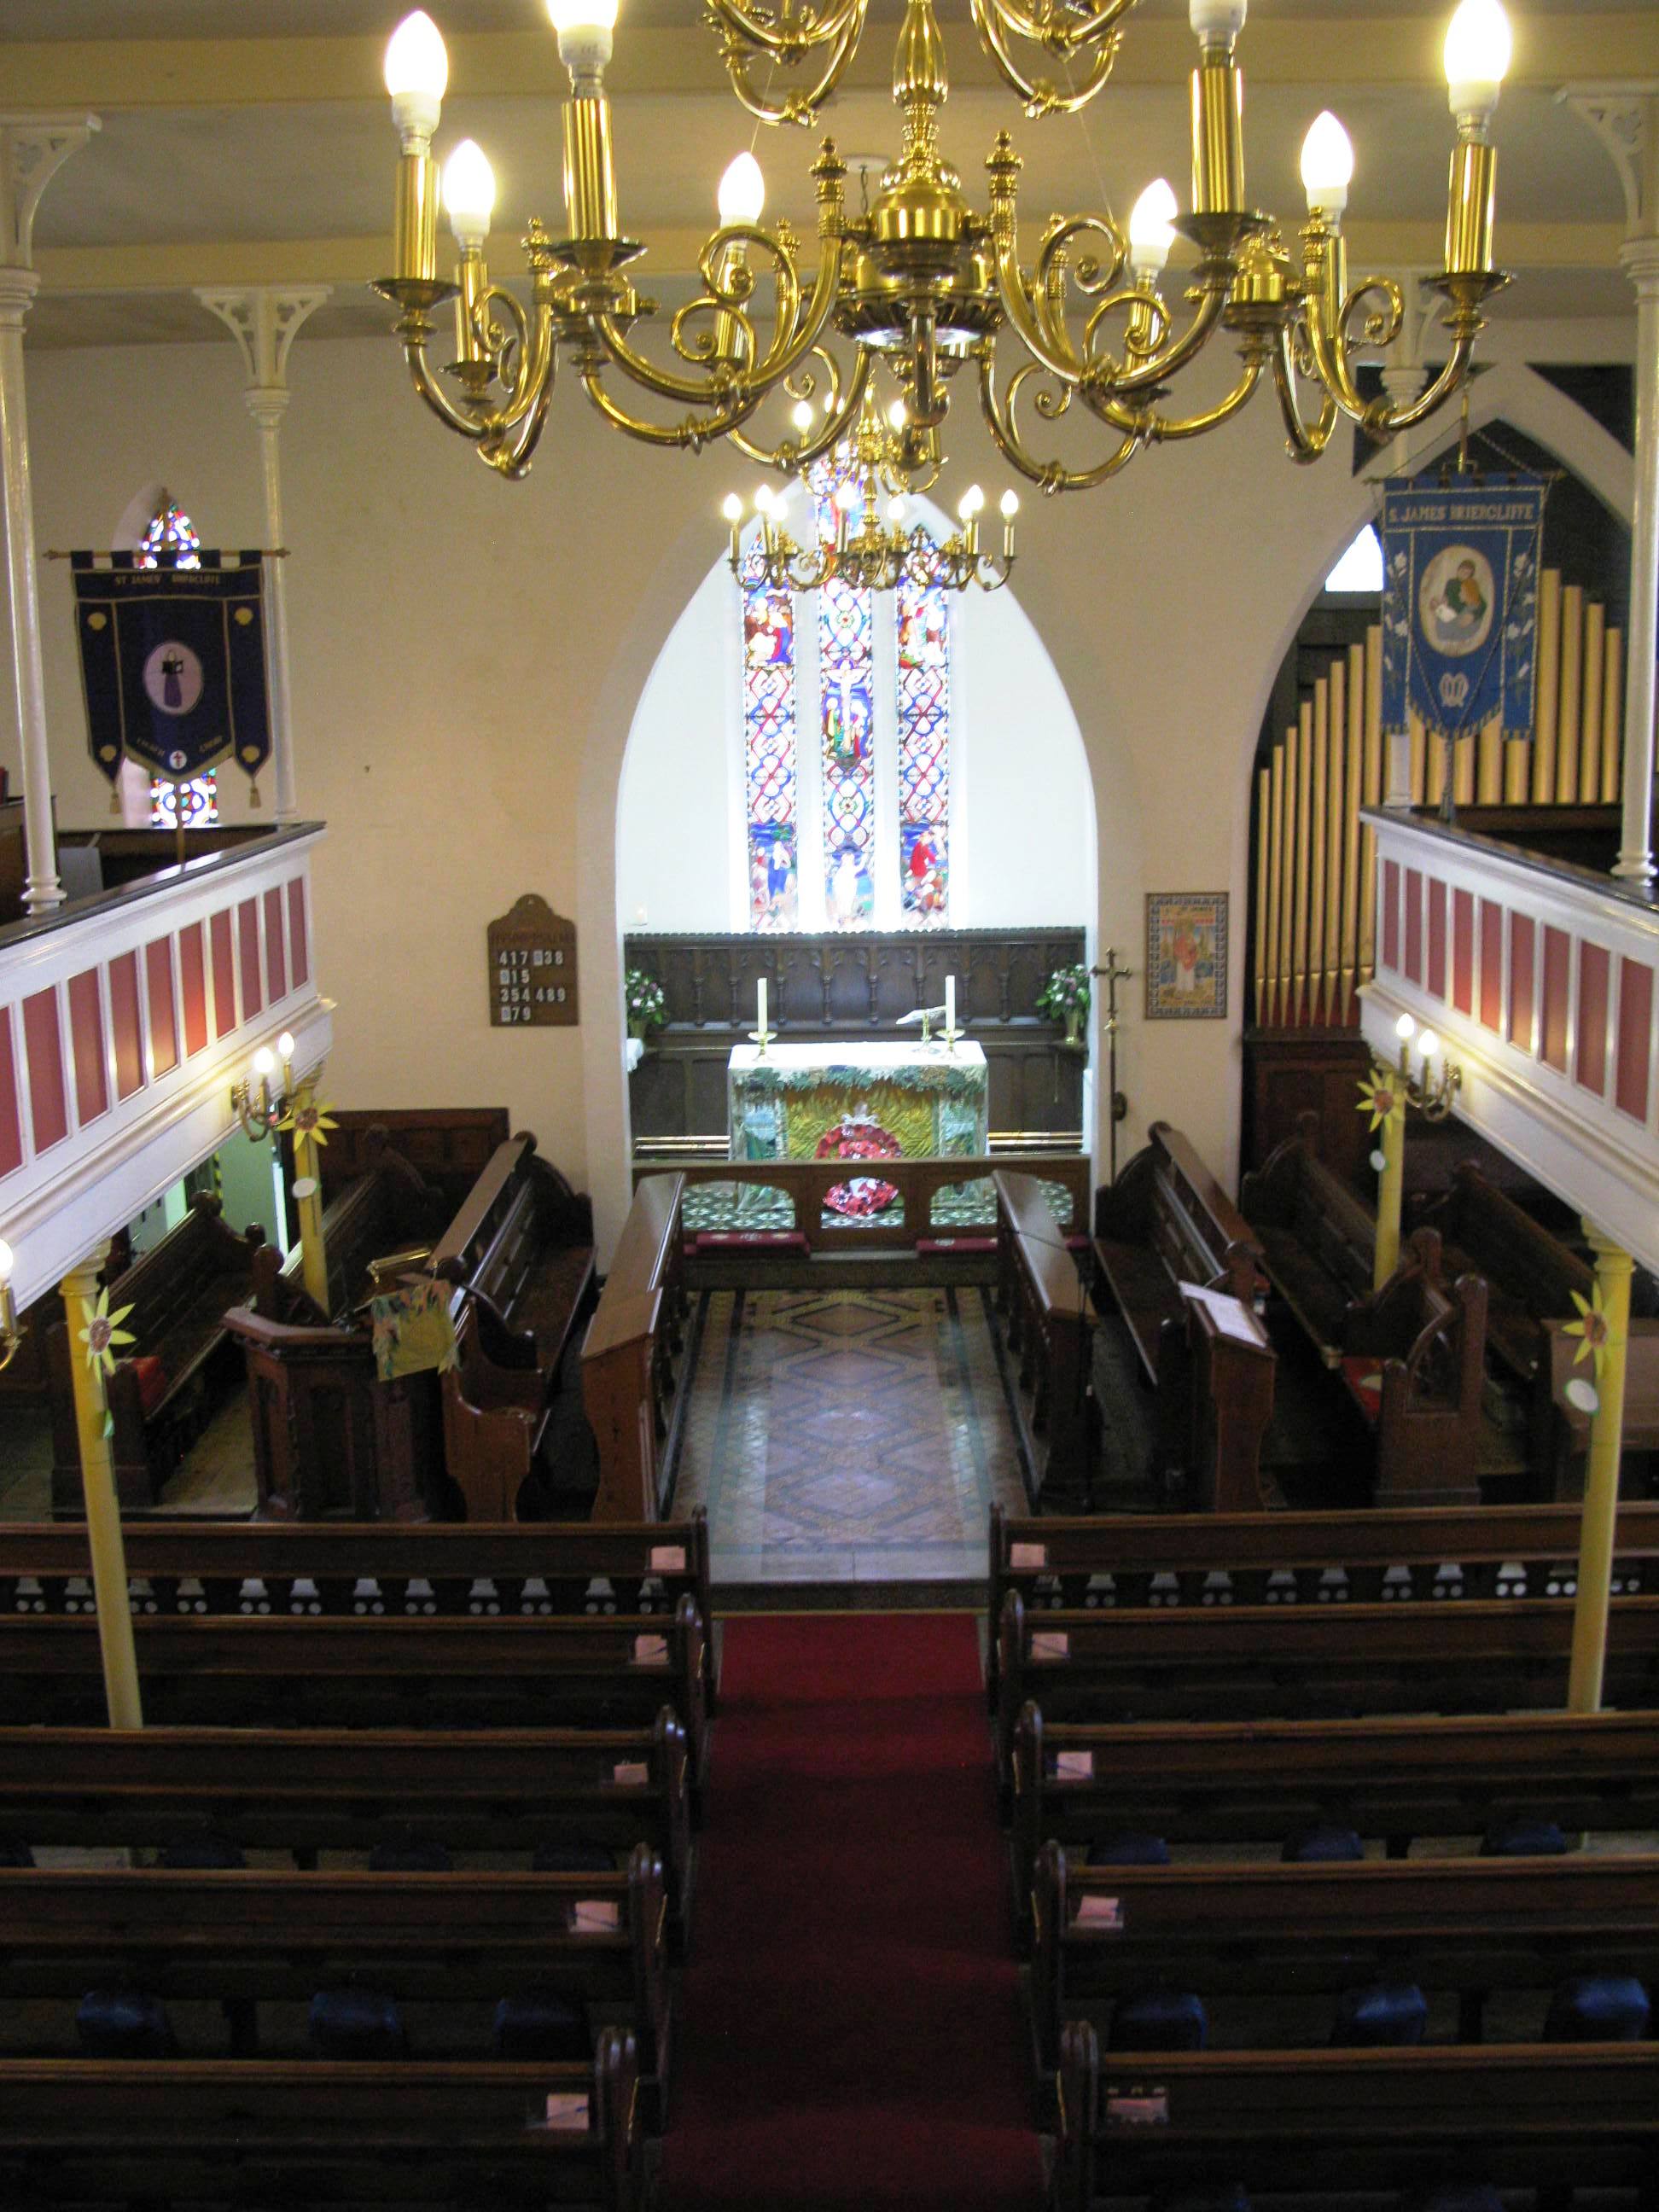 The Interior of St James, Briercliffe